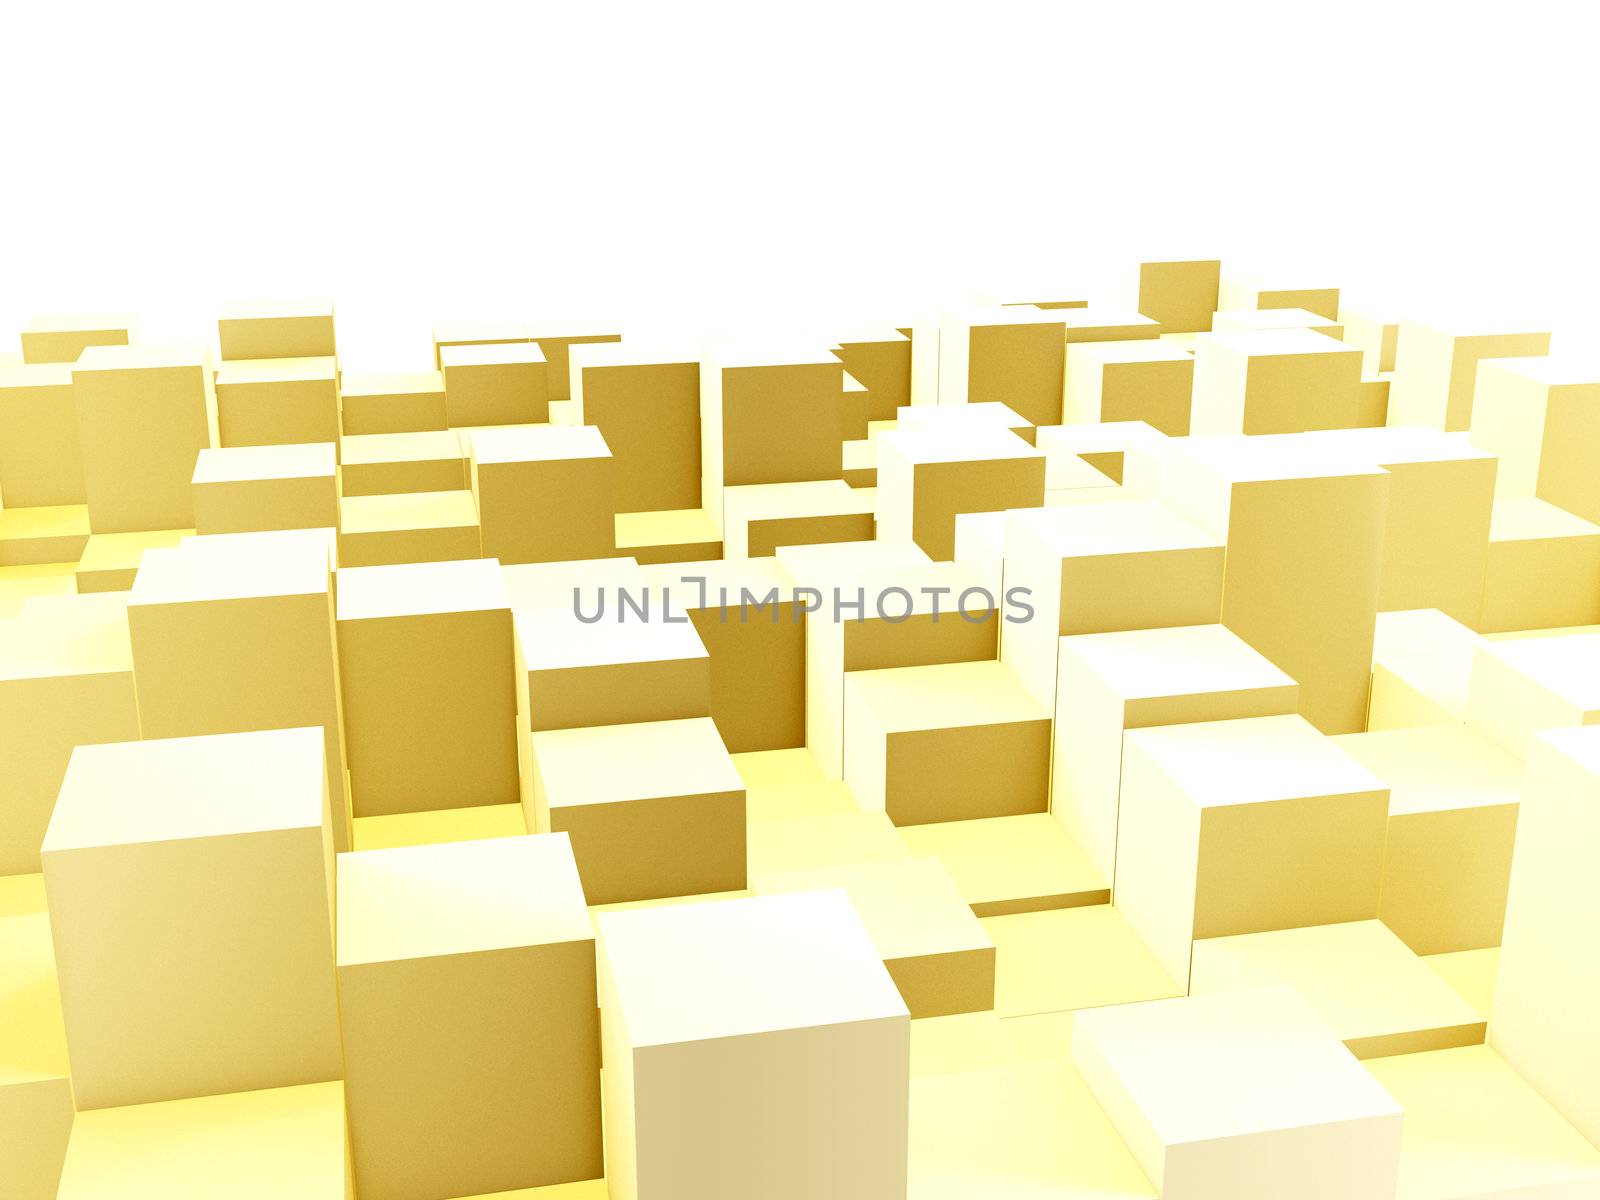 Golden equalizer bars - abstract 3d image